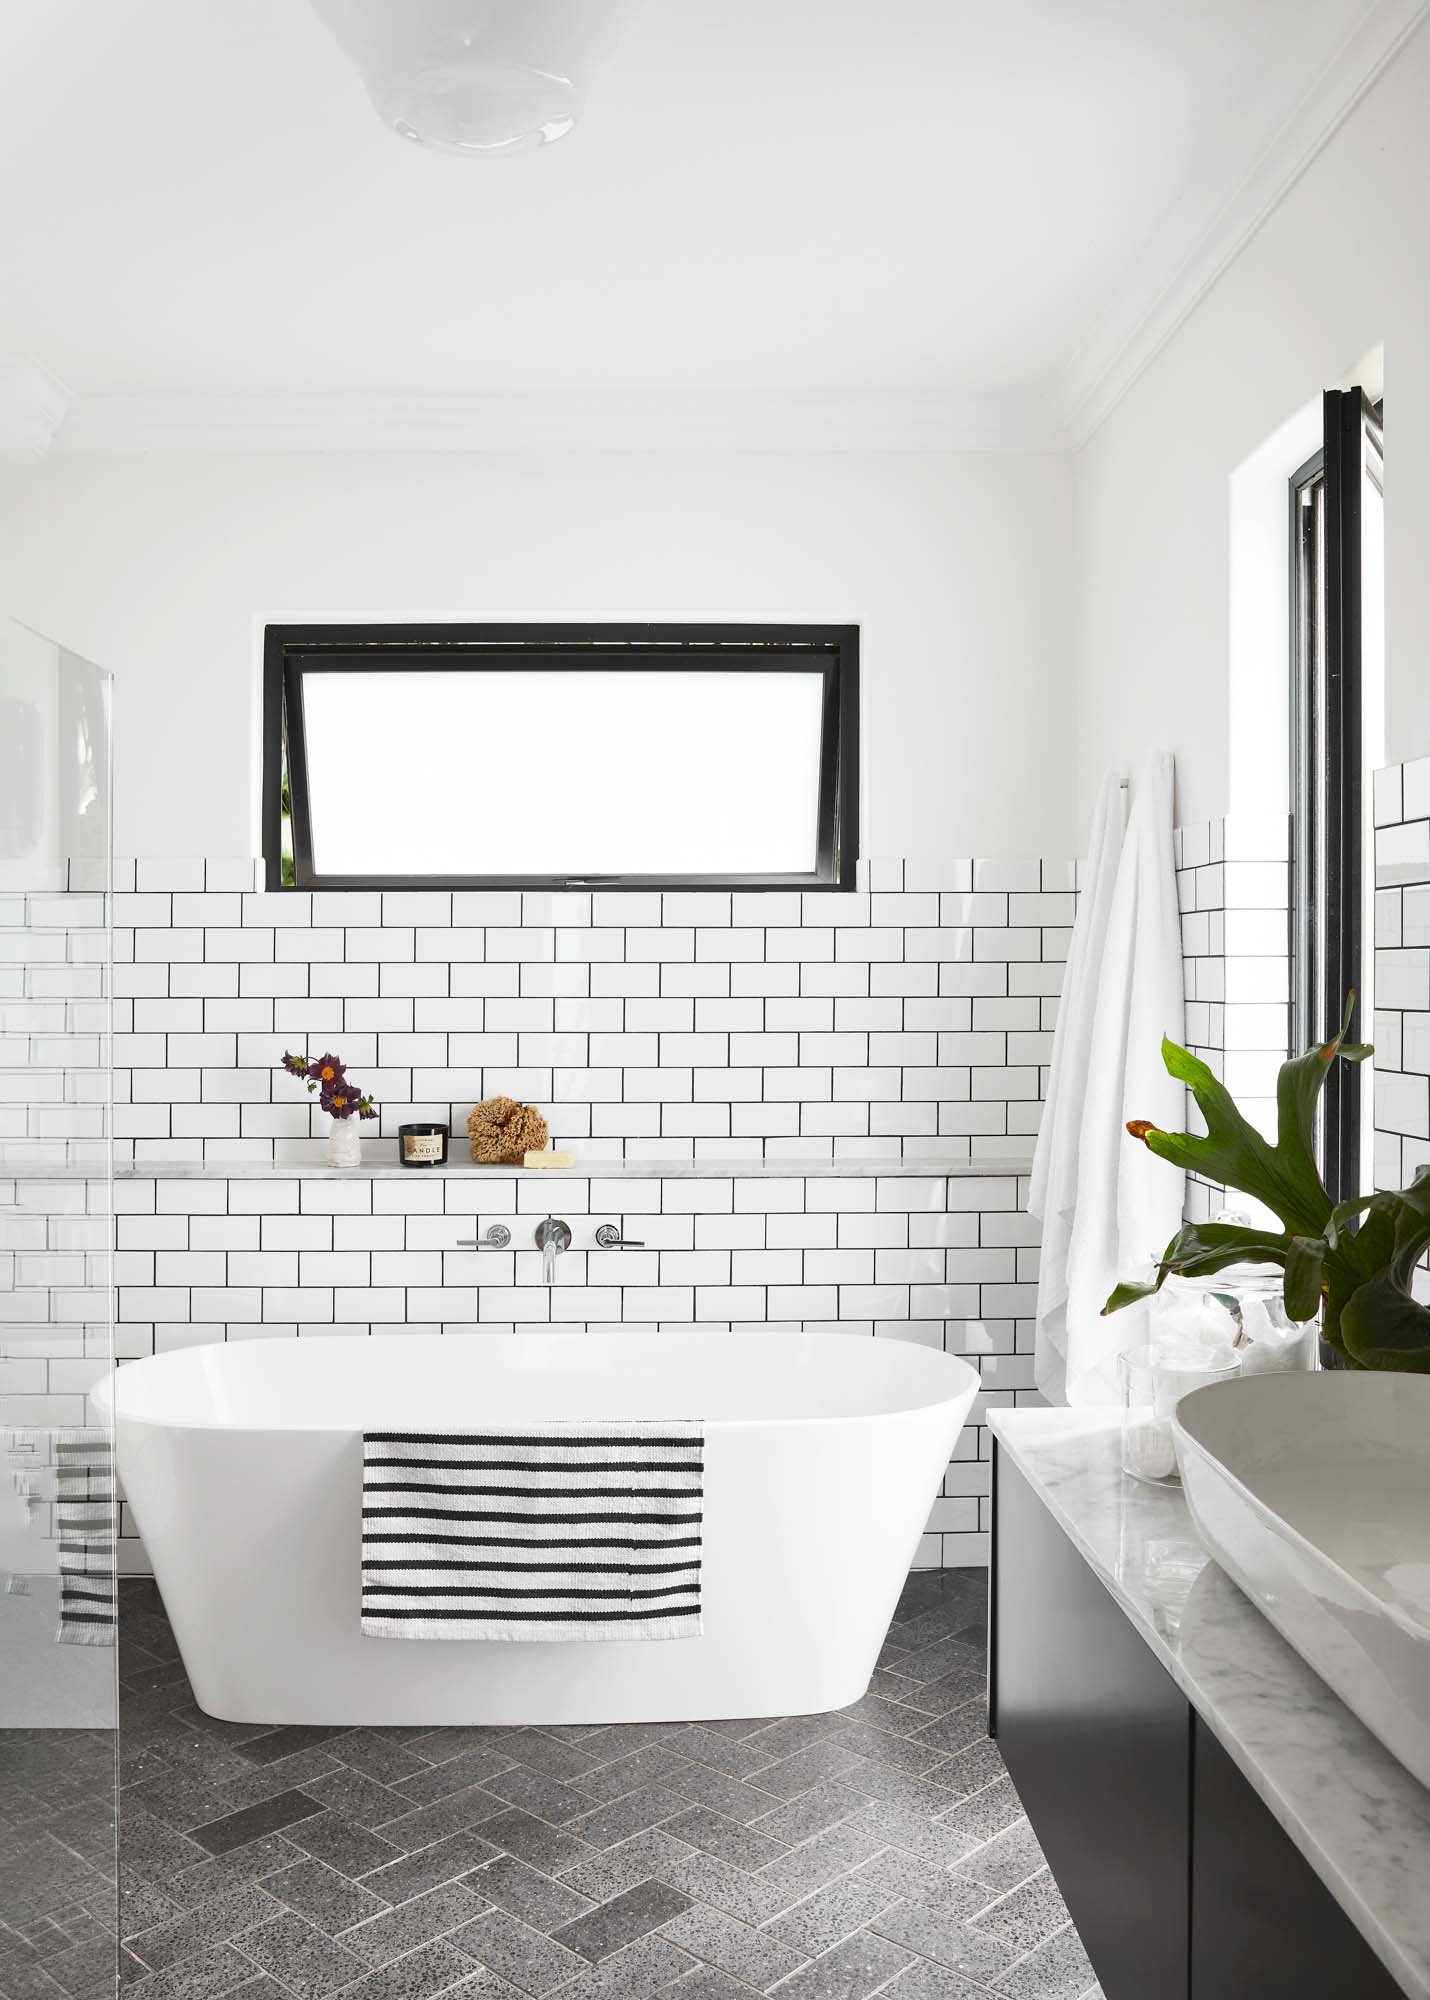 A bathroom with white subway tiles on the wall, a rectangular window above the tile line, a free standing bath in the middle, and grey subway tiles in a herringbone pattern on the floor